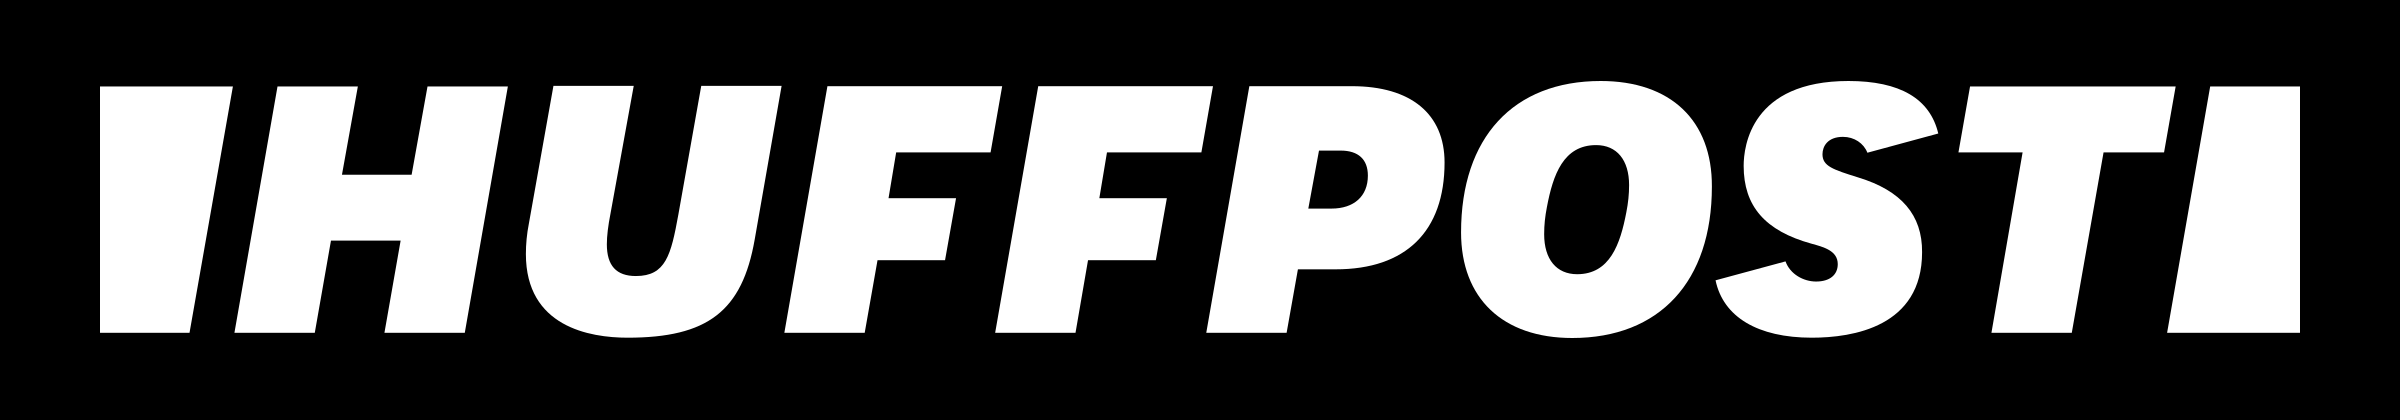 Huffpost Logo White - Huffpost, Transparent background PNG HD thumbnail